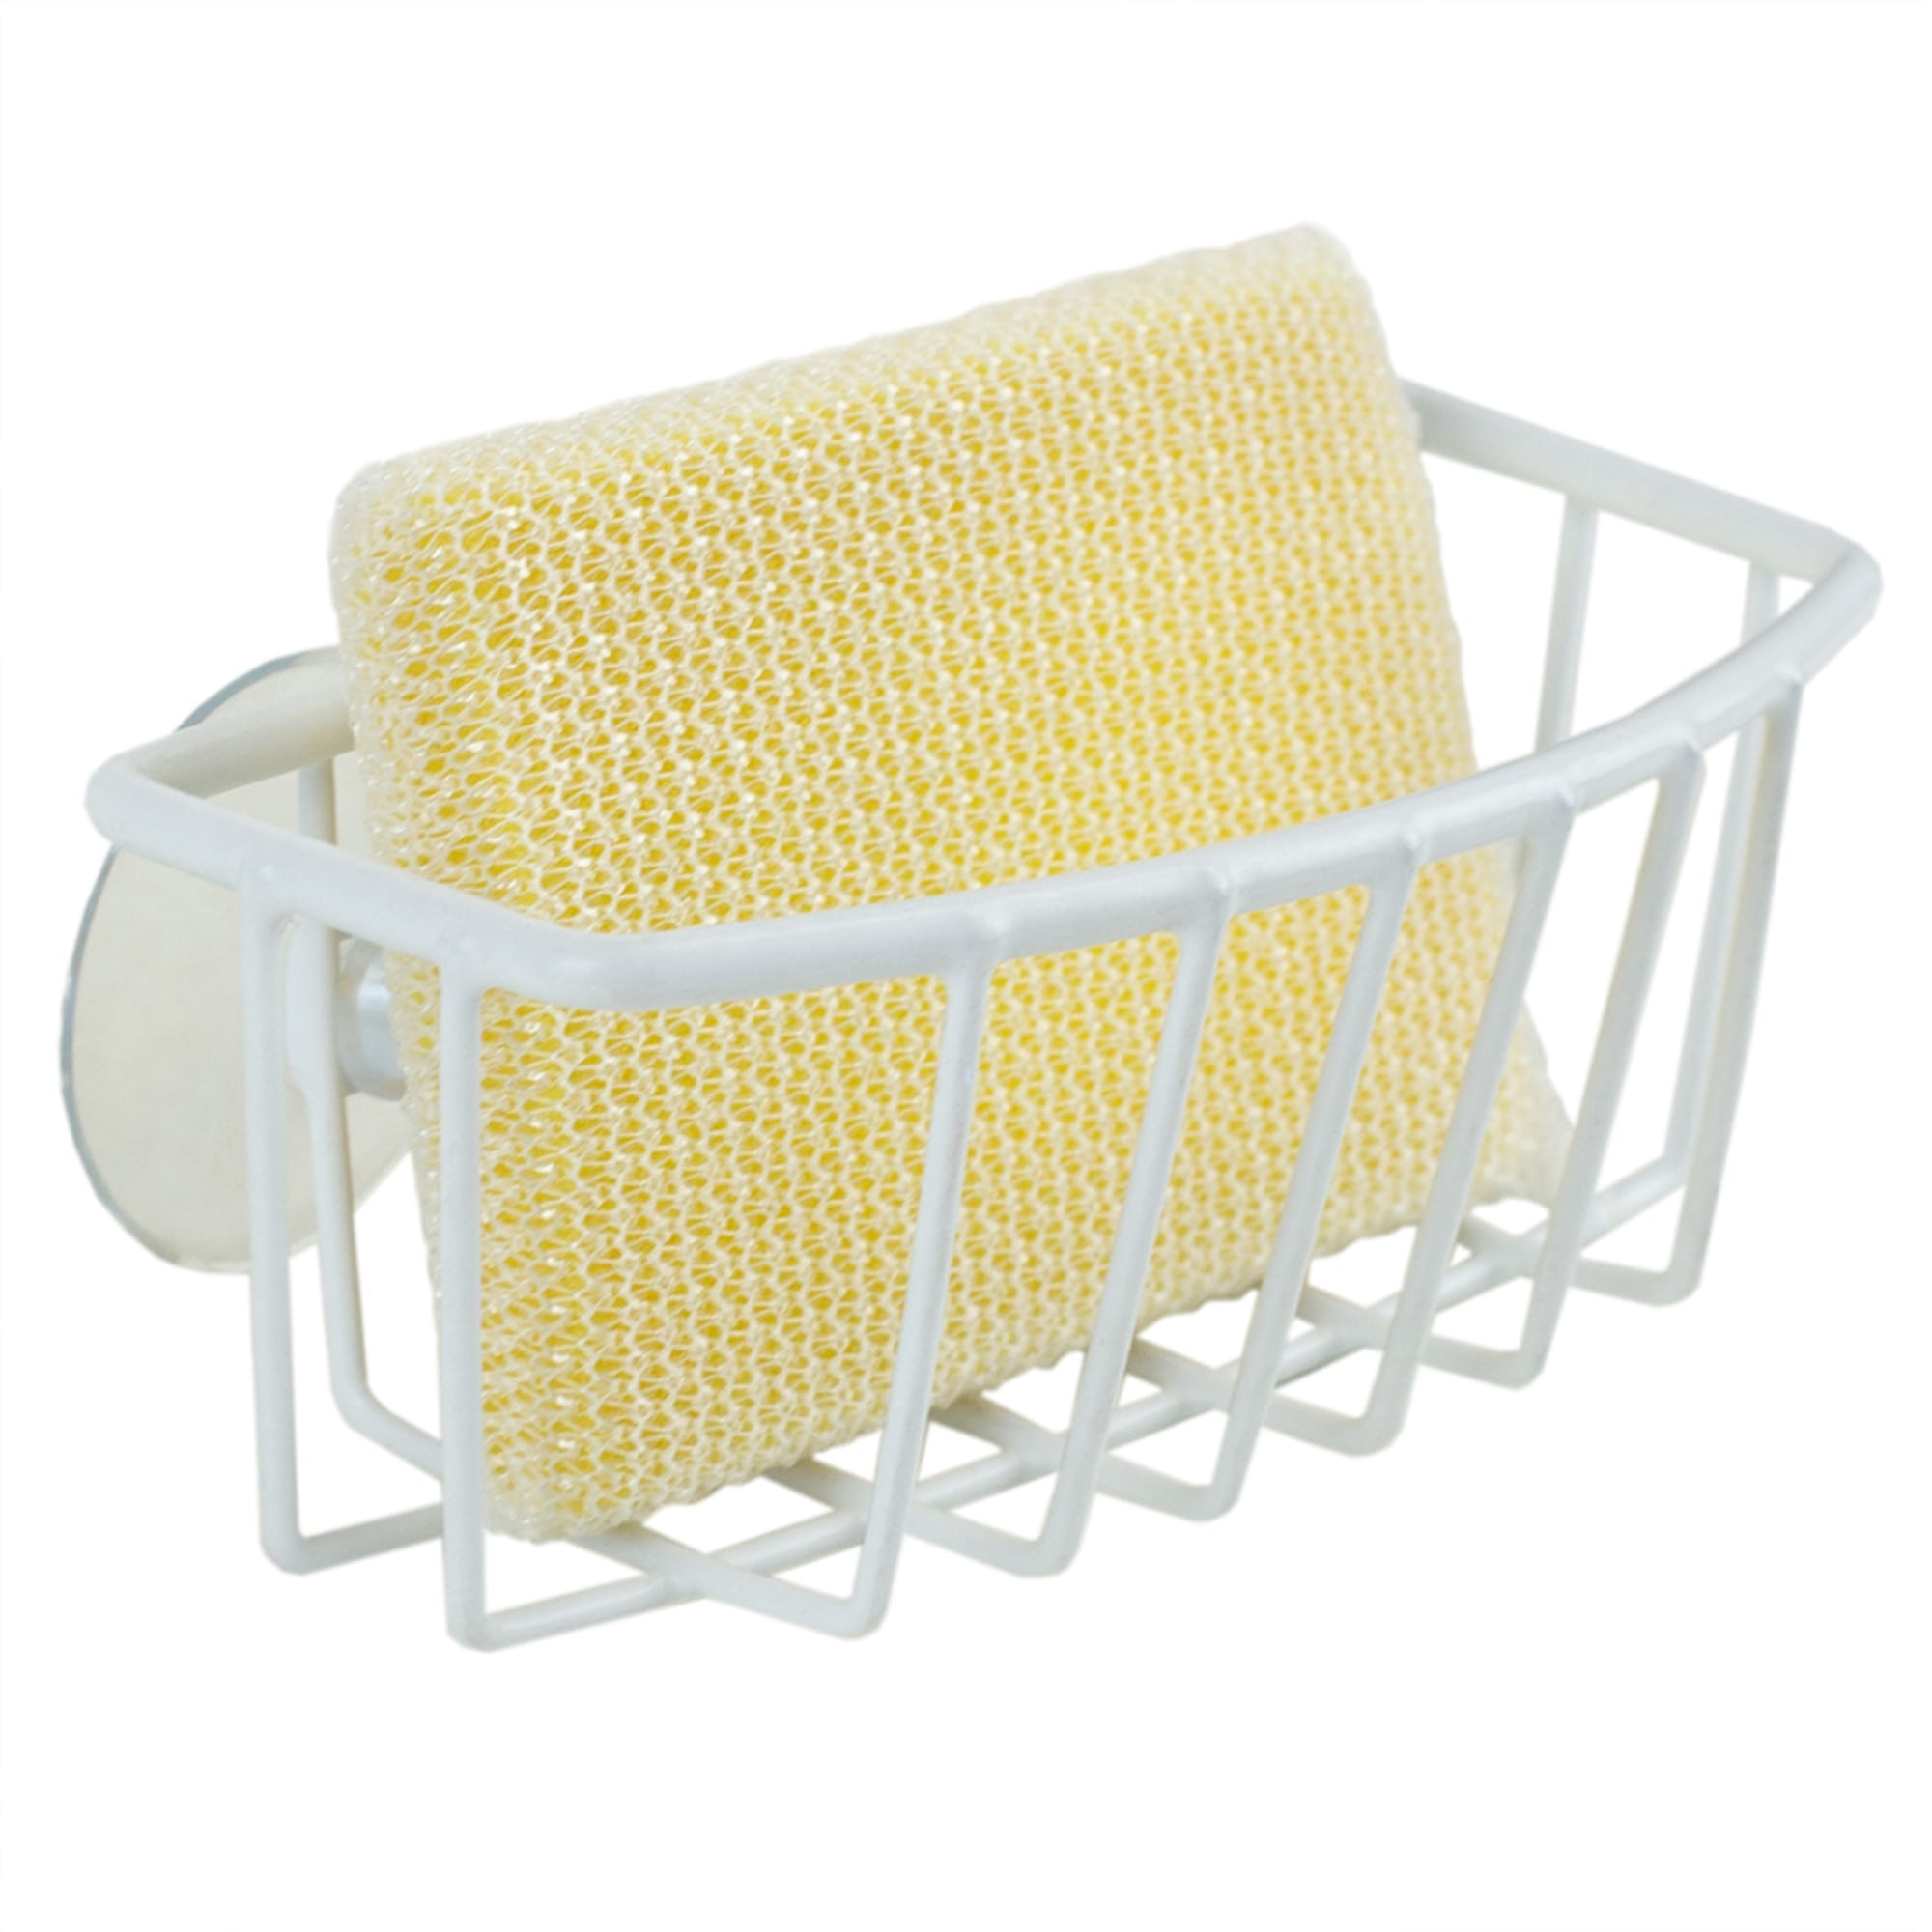 Home Basics Vinyl Coated Steel  Sponge Holder with Suction Cups, White $3.00 EACH, CASE PACK OF 24